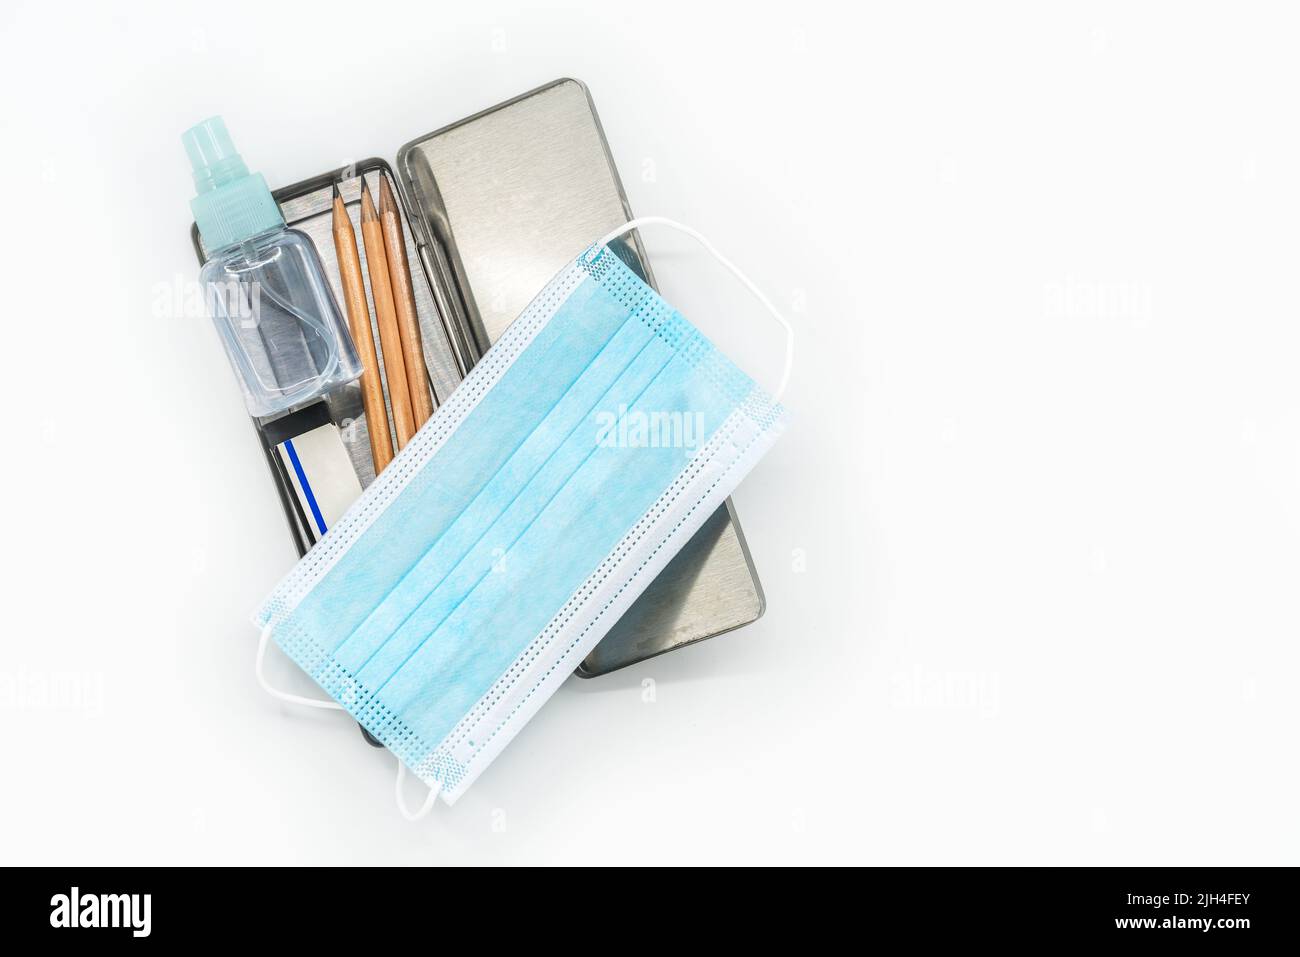 Top view stainless steel pencil box with pencils, medical face mask and a small bottle of alcohol, the isolated image on white background, the concept Stock Photo